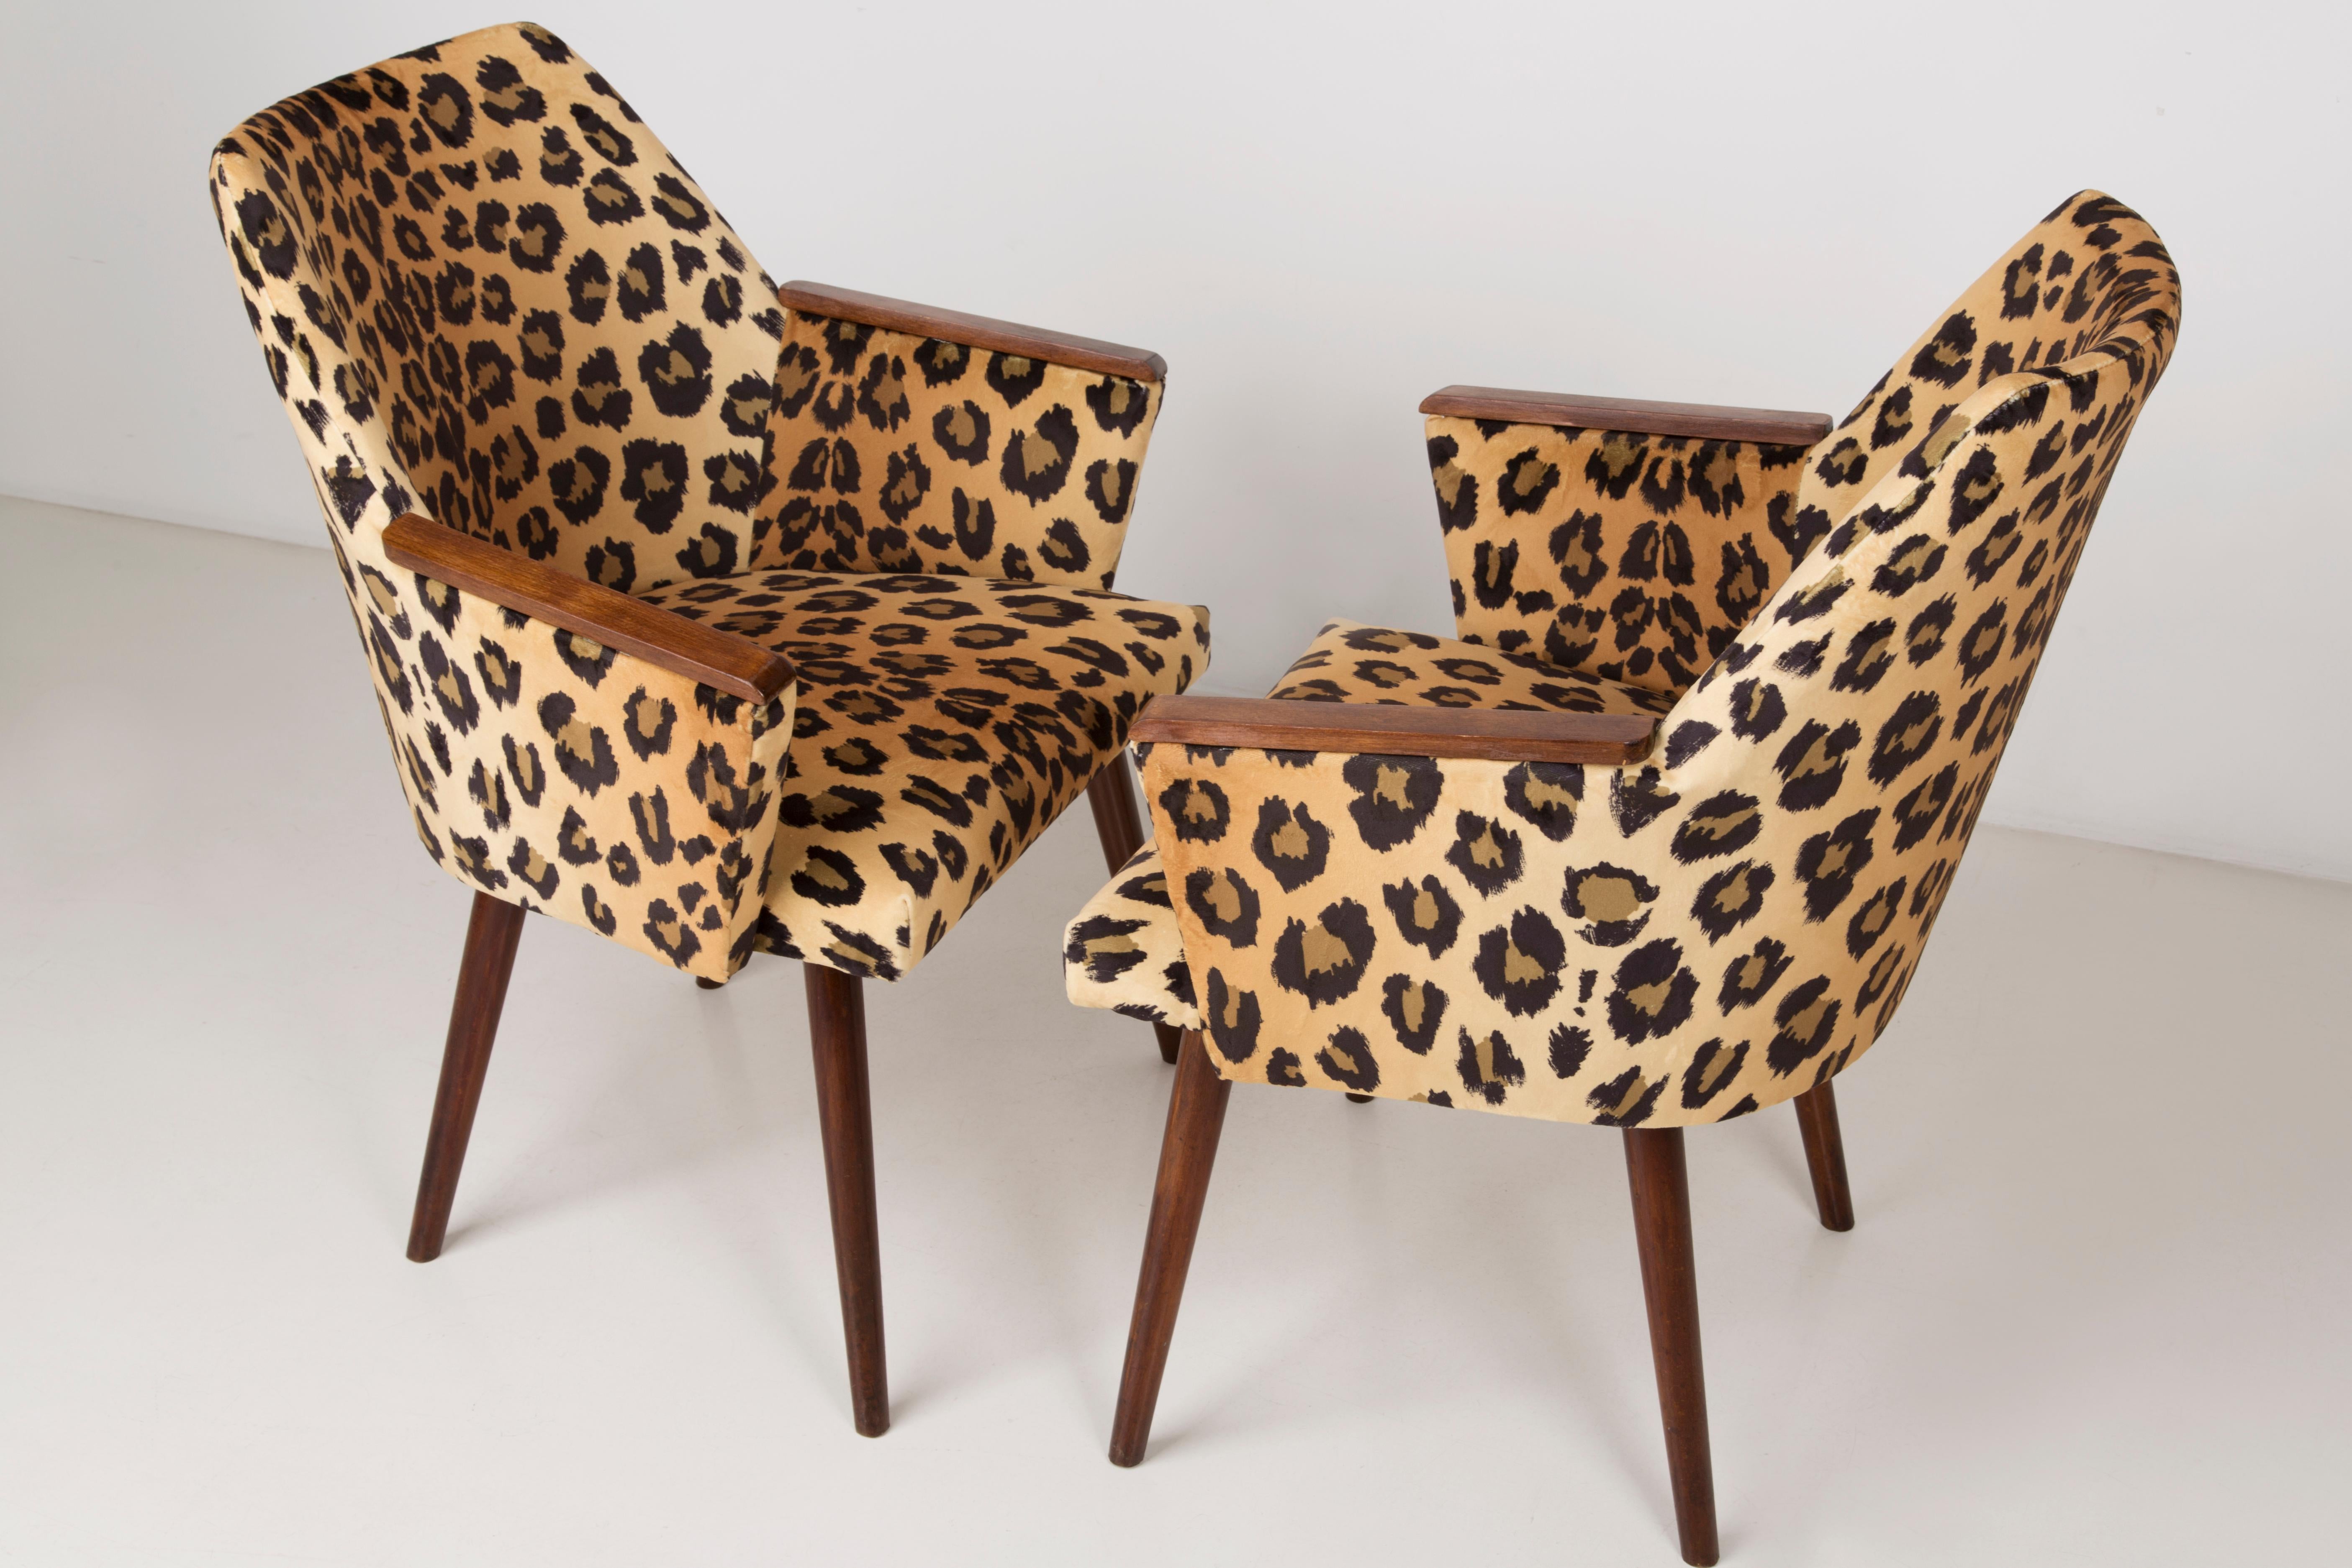 Set of Two Mid-Century Modern Leopard Print Chairs, 1960s, Germany 4